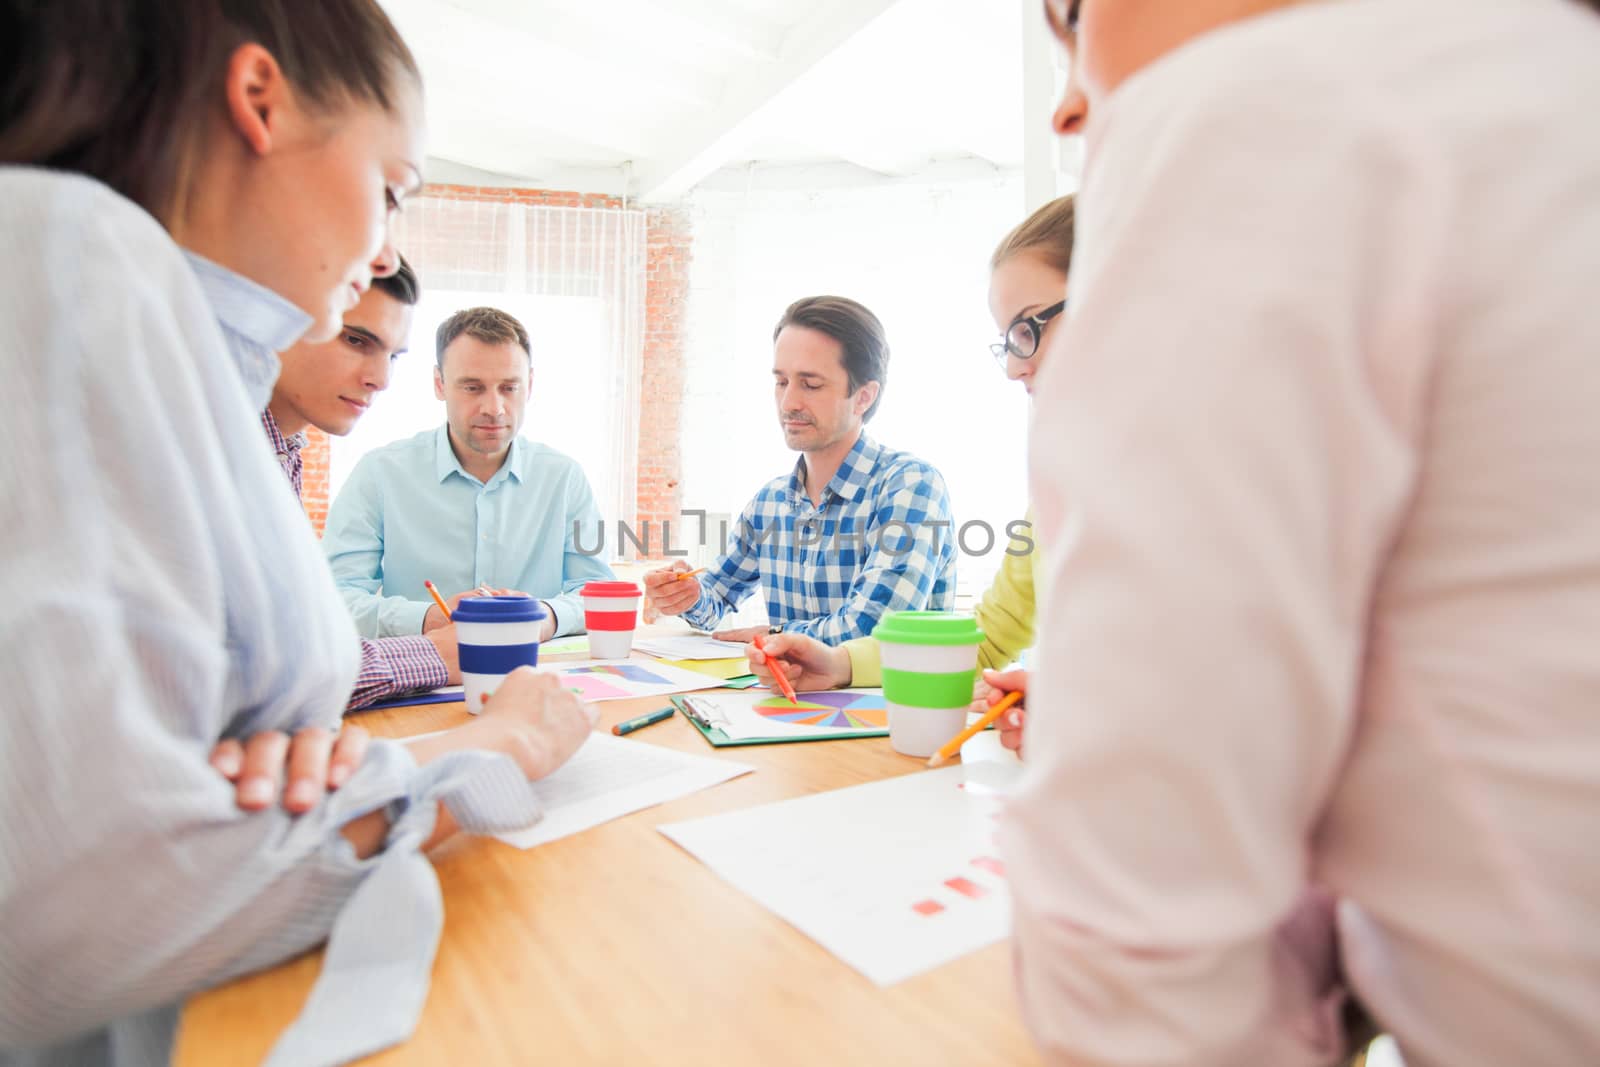 Group of business people busy discussing financial matter during meeting